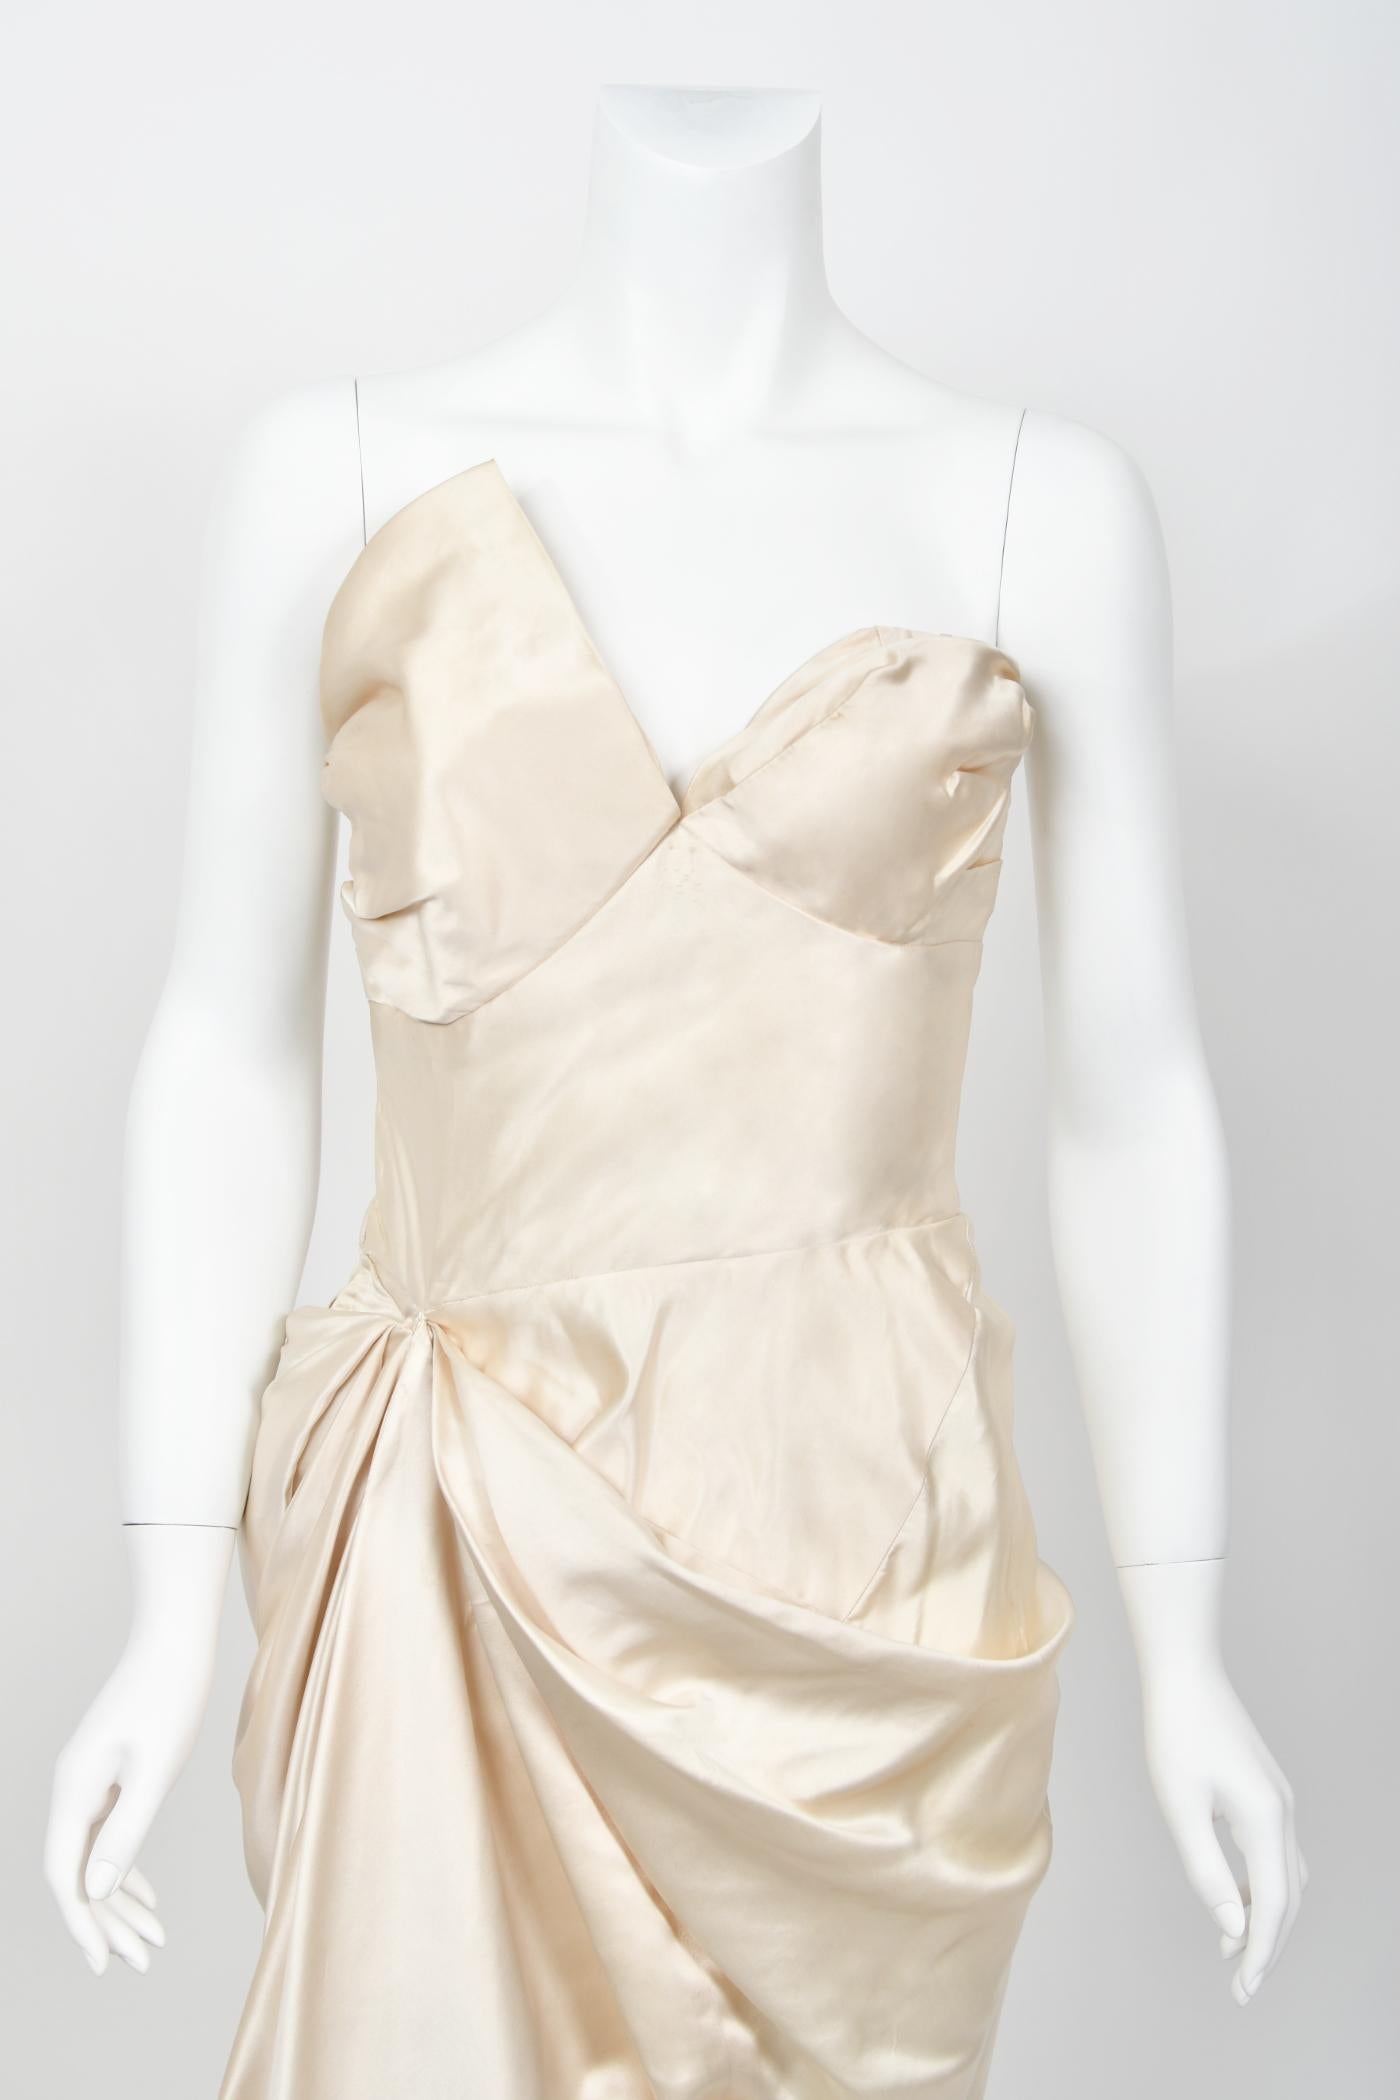 1949 Jeanne Lanvin Haute Couture Ivory Silk Satin Strapless Draped Bridal Gown  For Sale 5